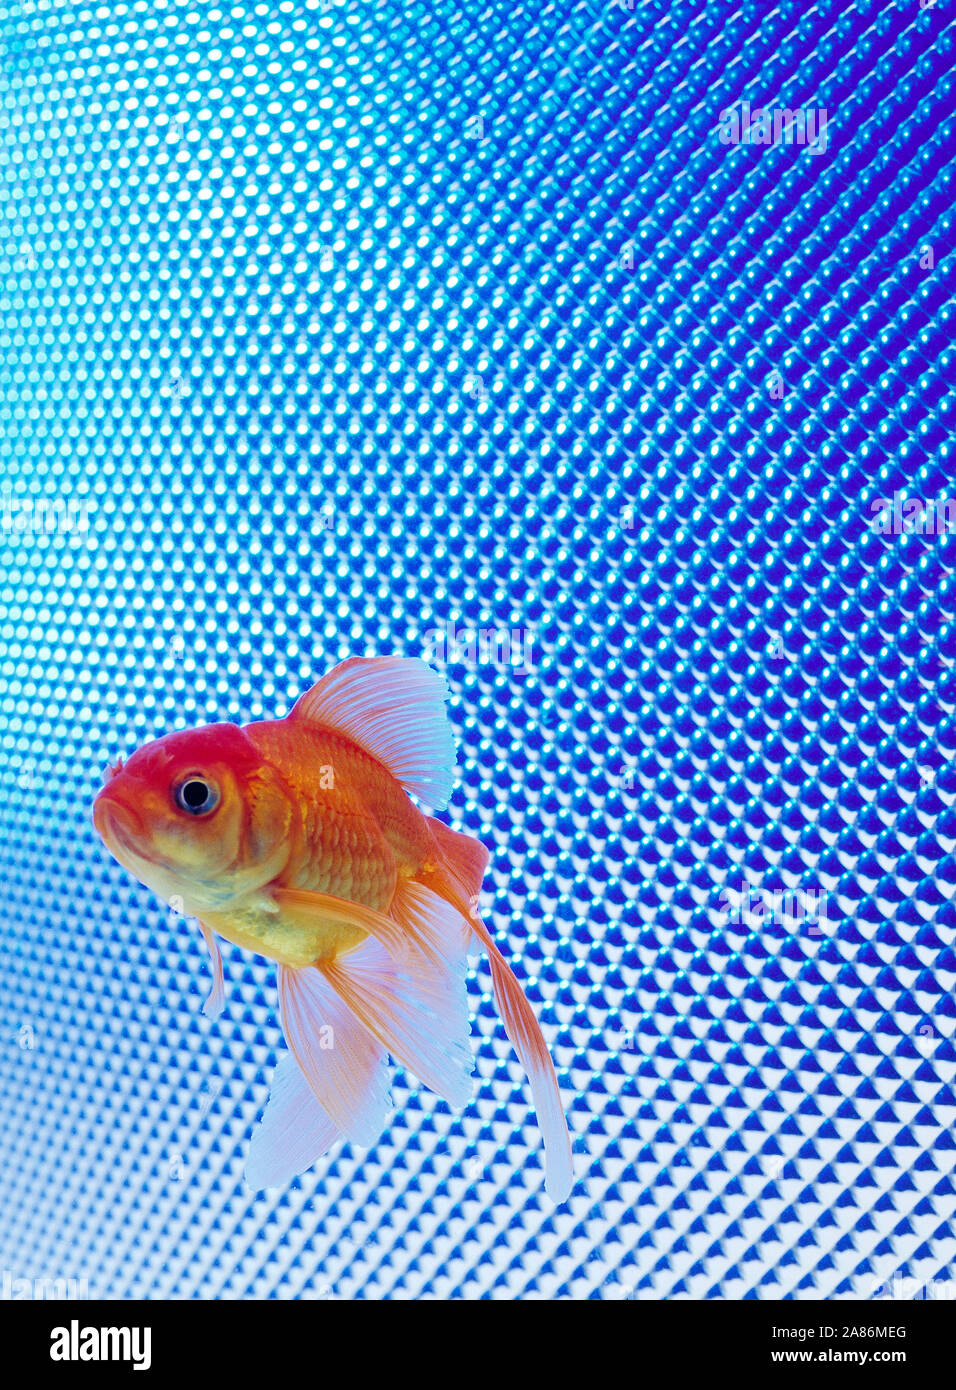 Fantail Goldfish swimming in tank with metallic blue textured background. Stock Photo